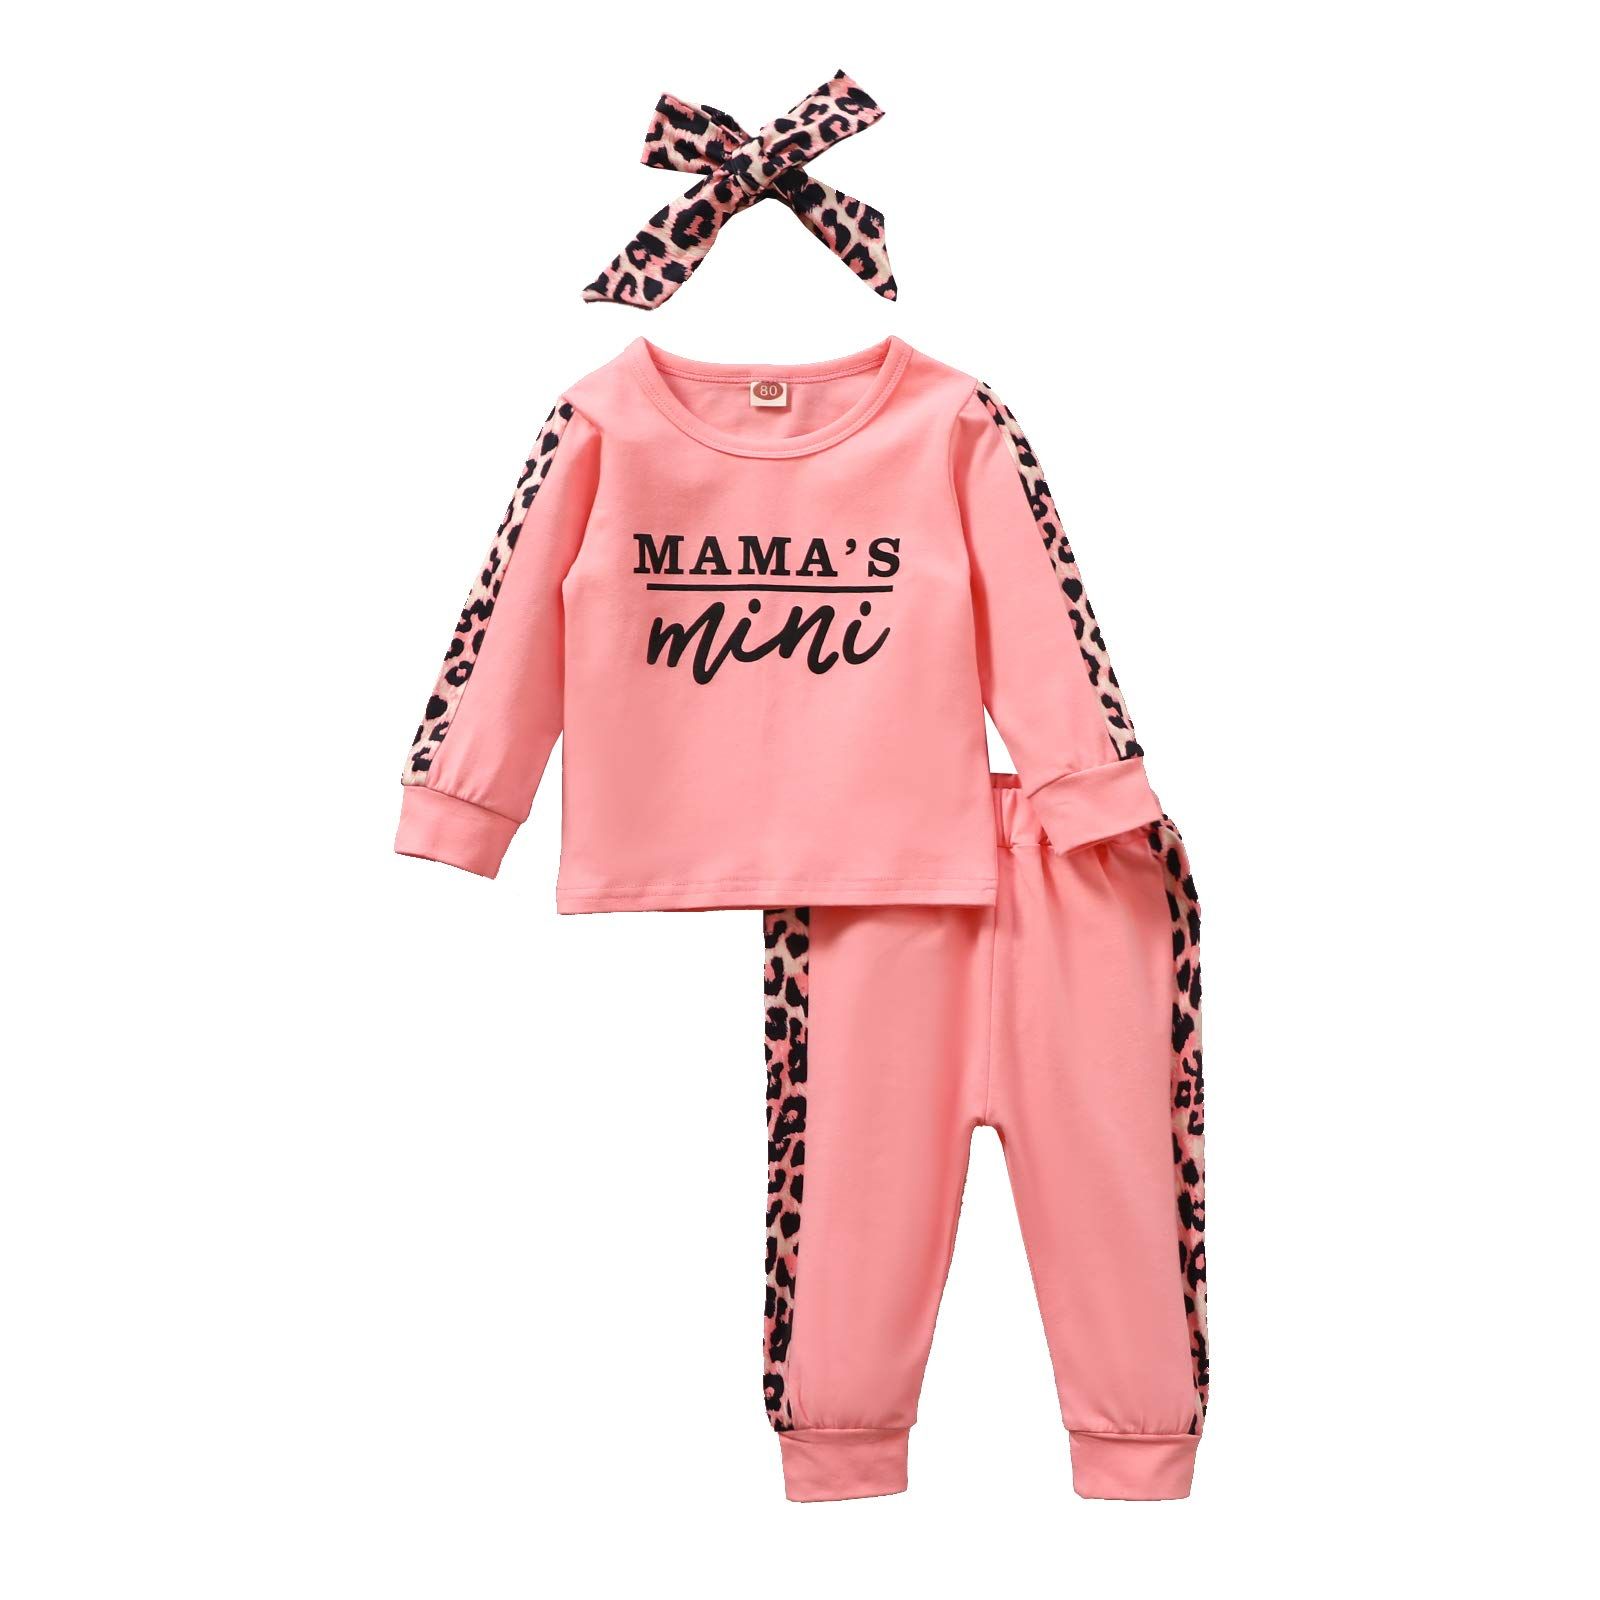 PigMaMa Baby Girl Clothes Toddler Outfits Long Sleeve T-Shirt Tops Letter Print Leopard Headband Pan | Amazon (US)